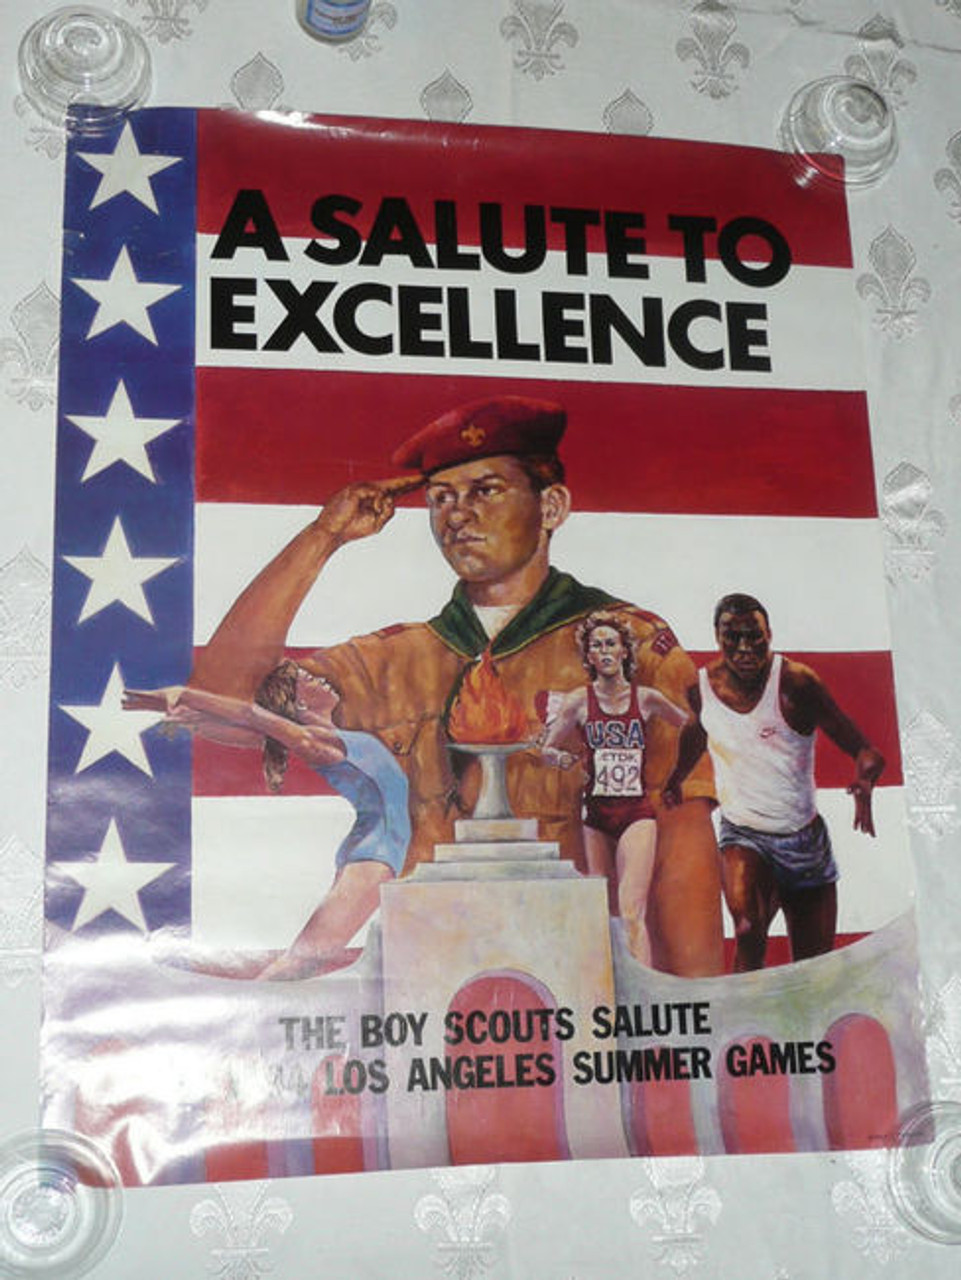 1984 Summer Olympics Boy Scout "A Salute to Excellance" Poster, Los Angeles